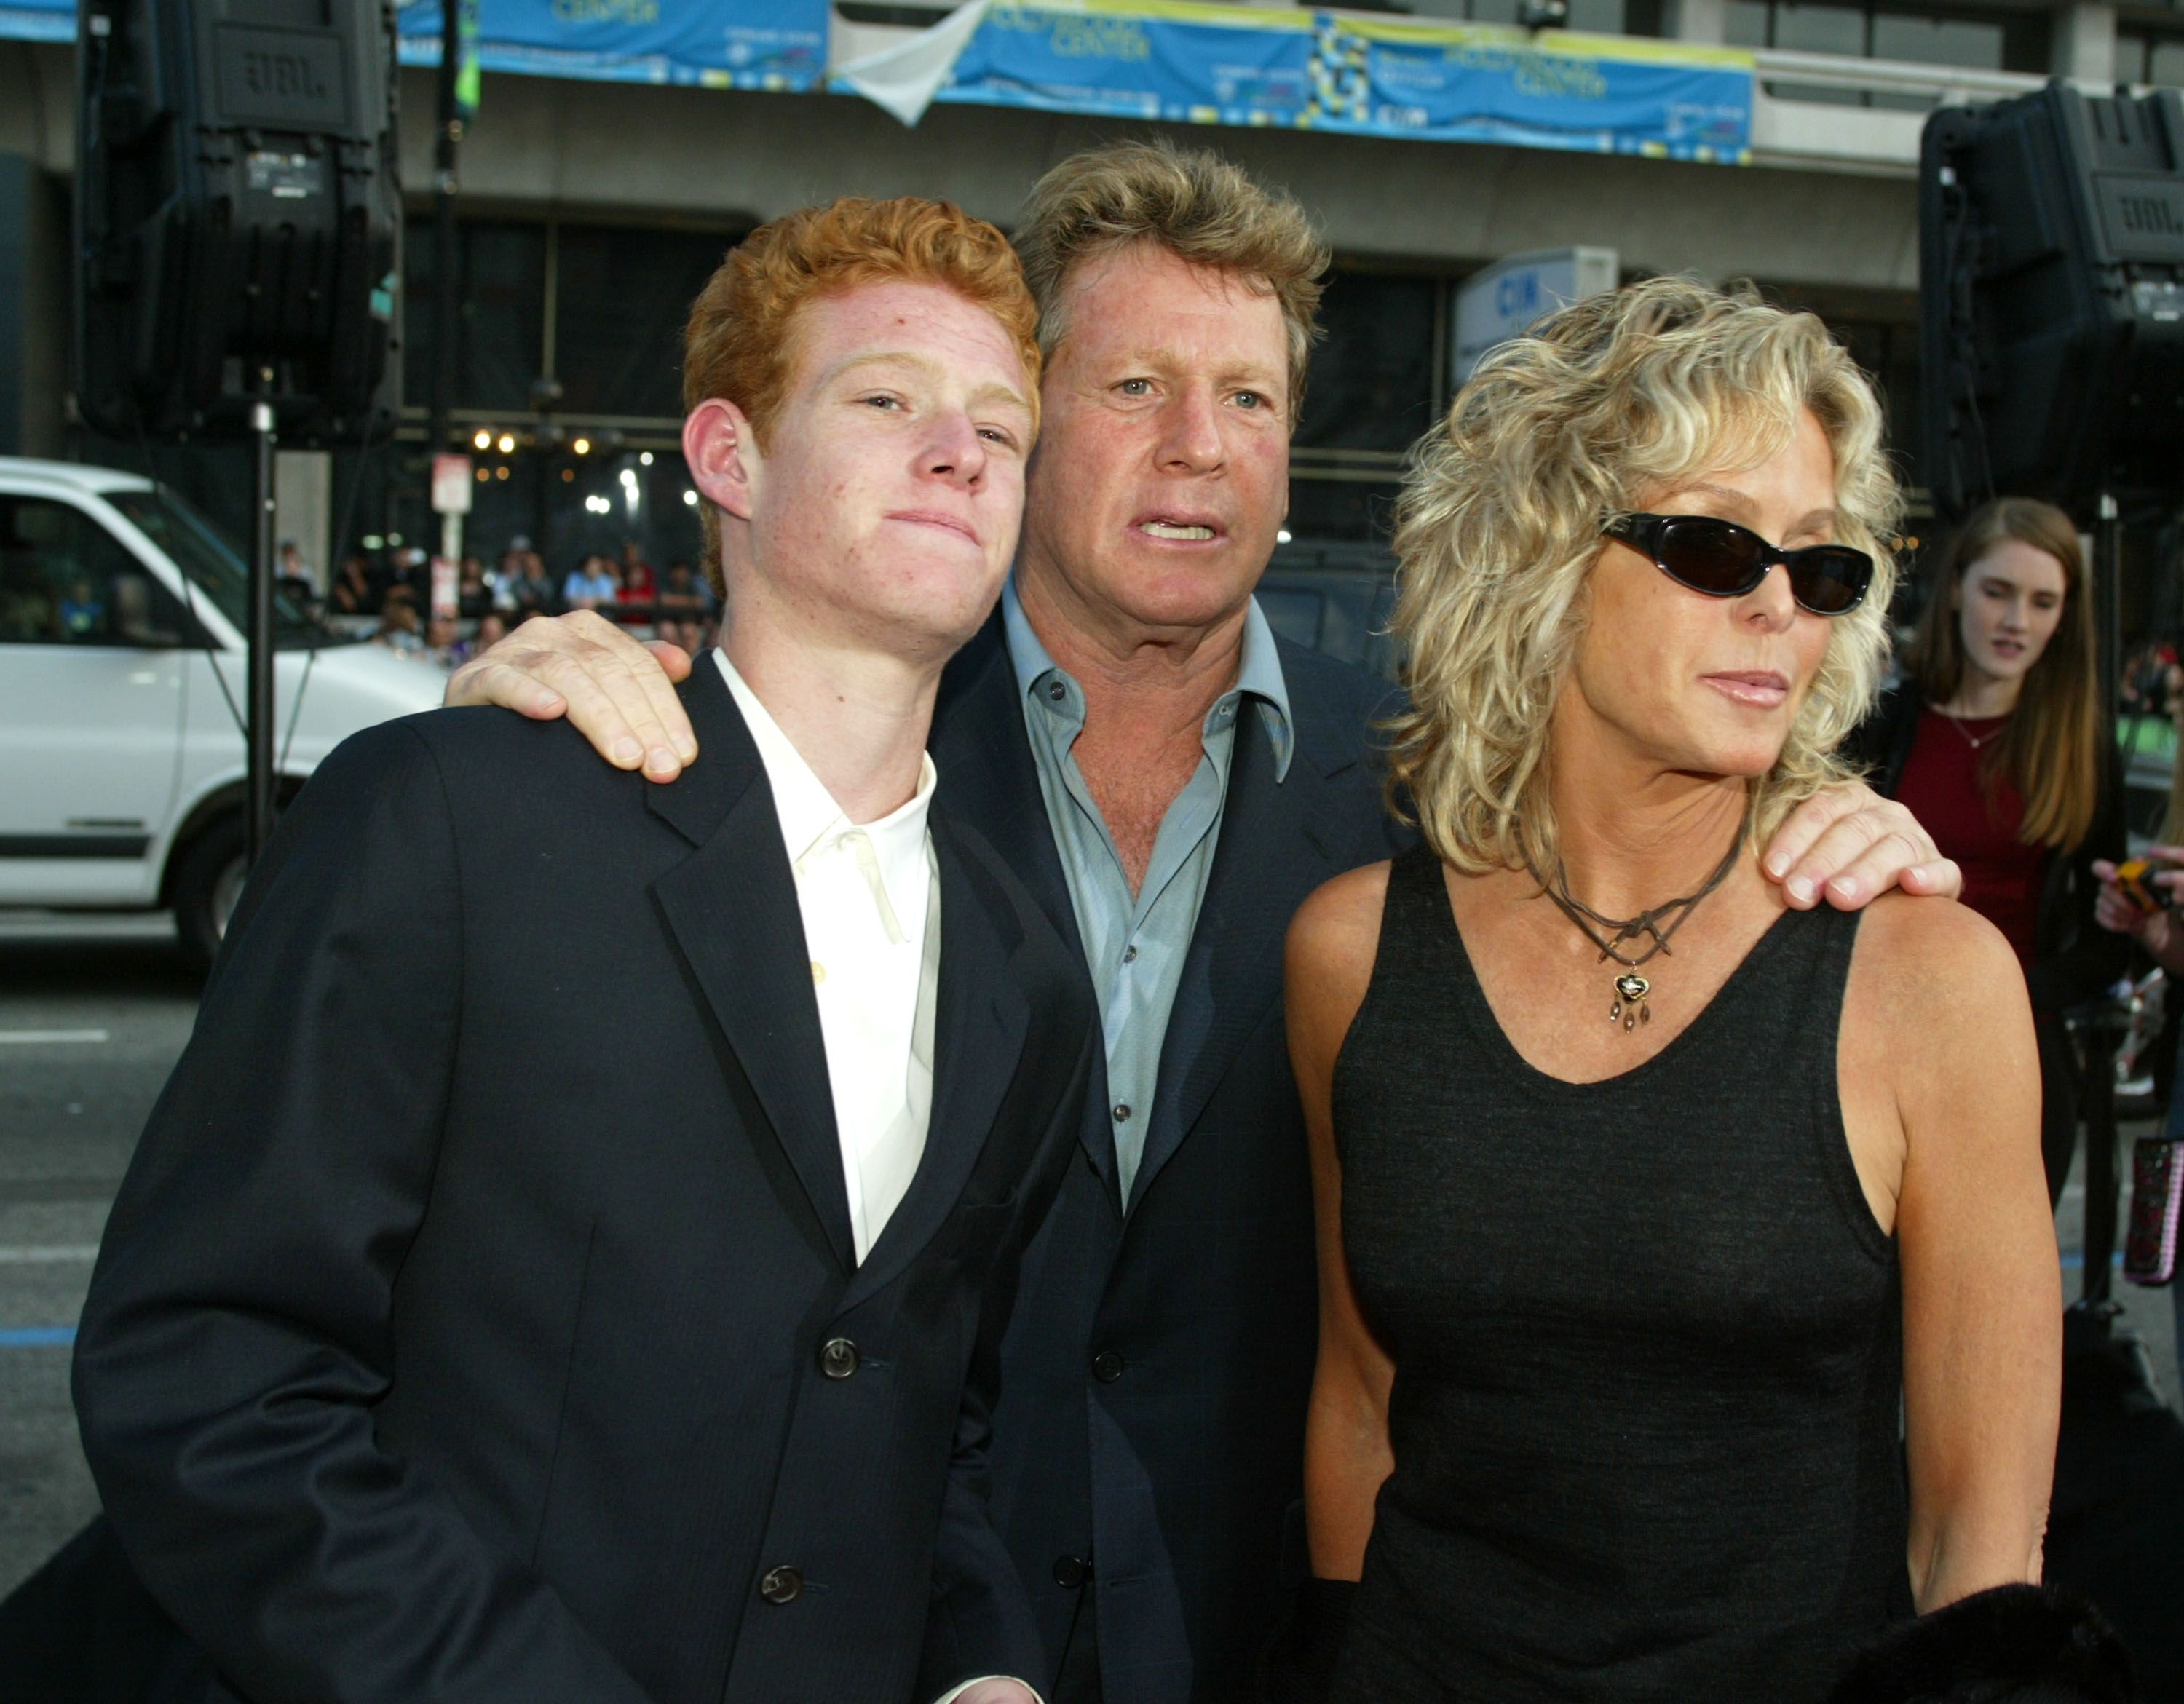 Ryan O'Neal, Farrah Fawcett and Redmond O'Neal in 2003 at Los Angeles. | Photo: Getty Images